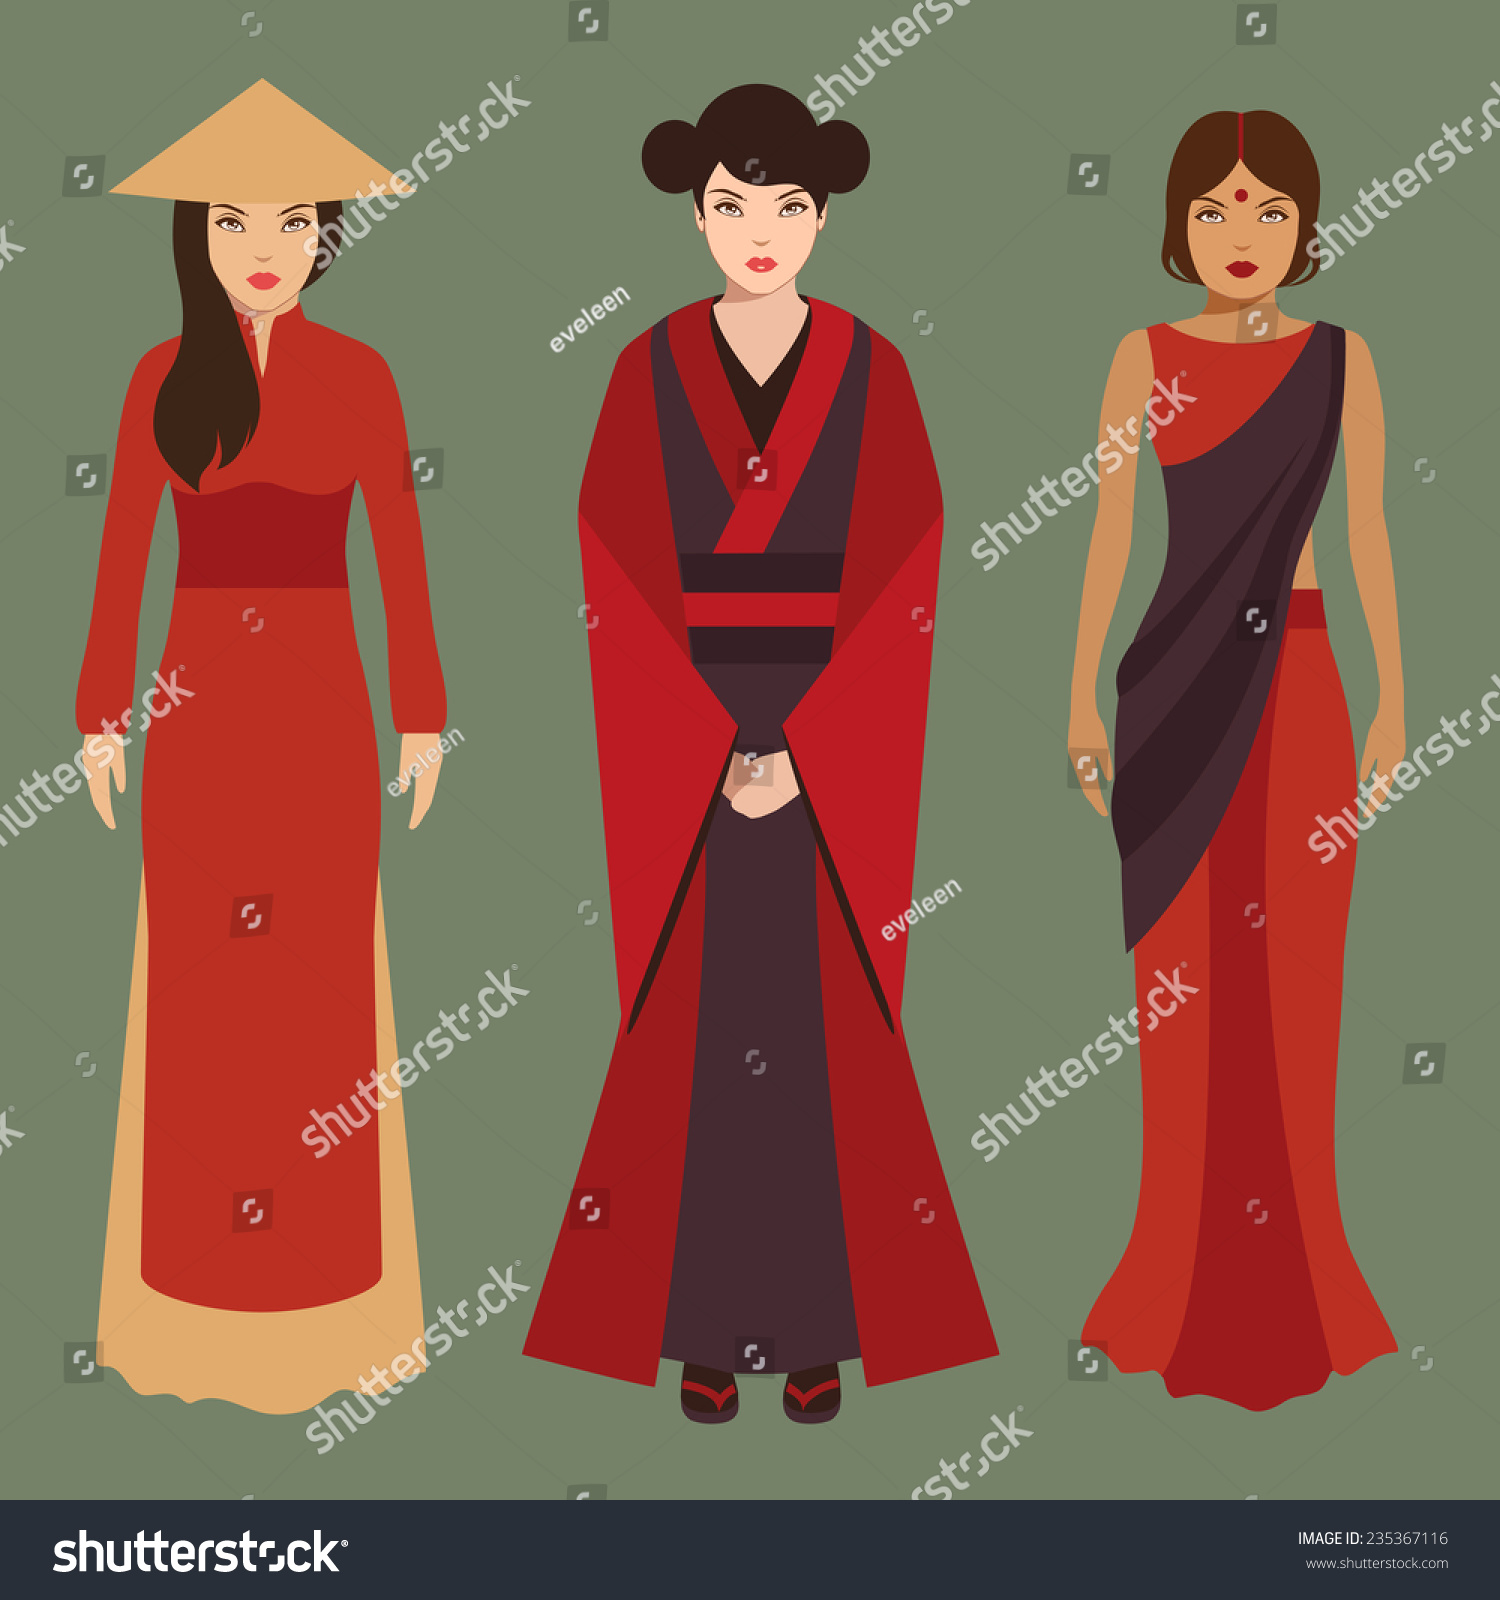 Culture And The Asian Woman 68